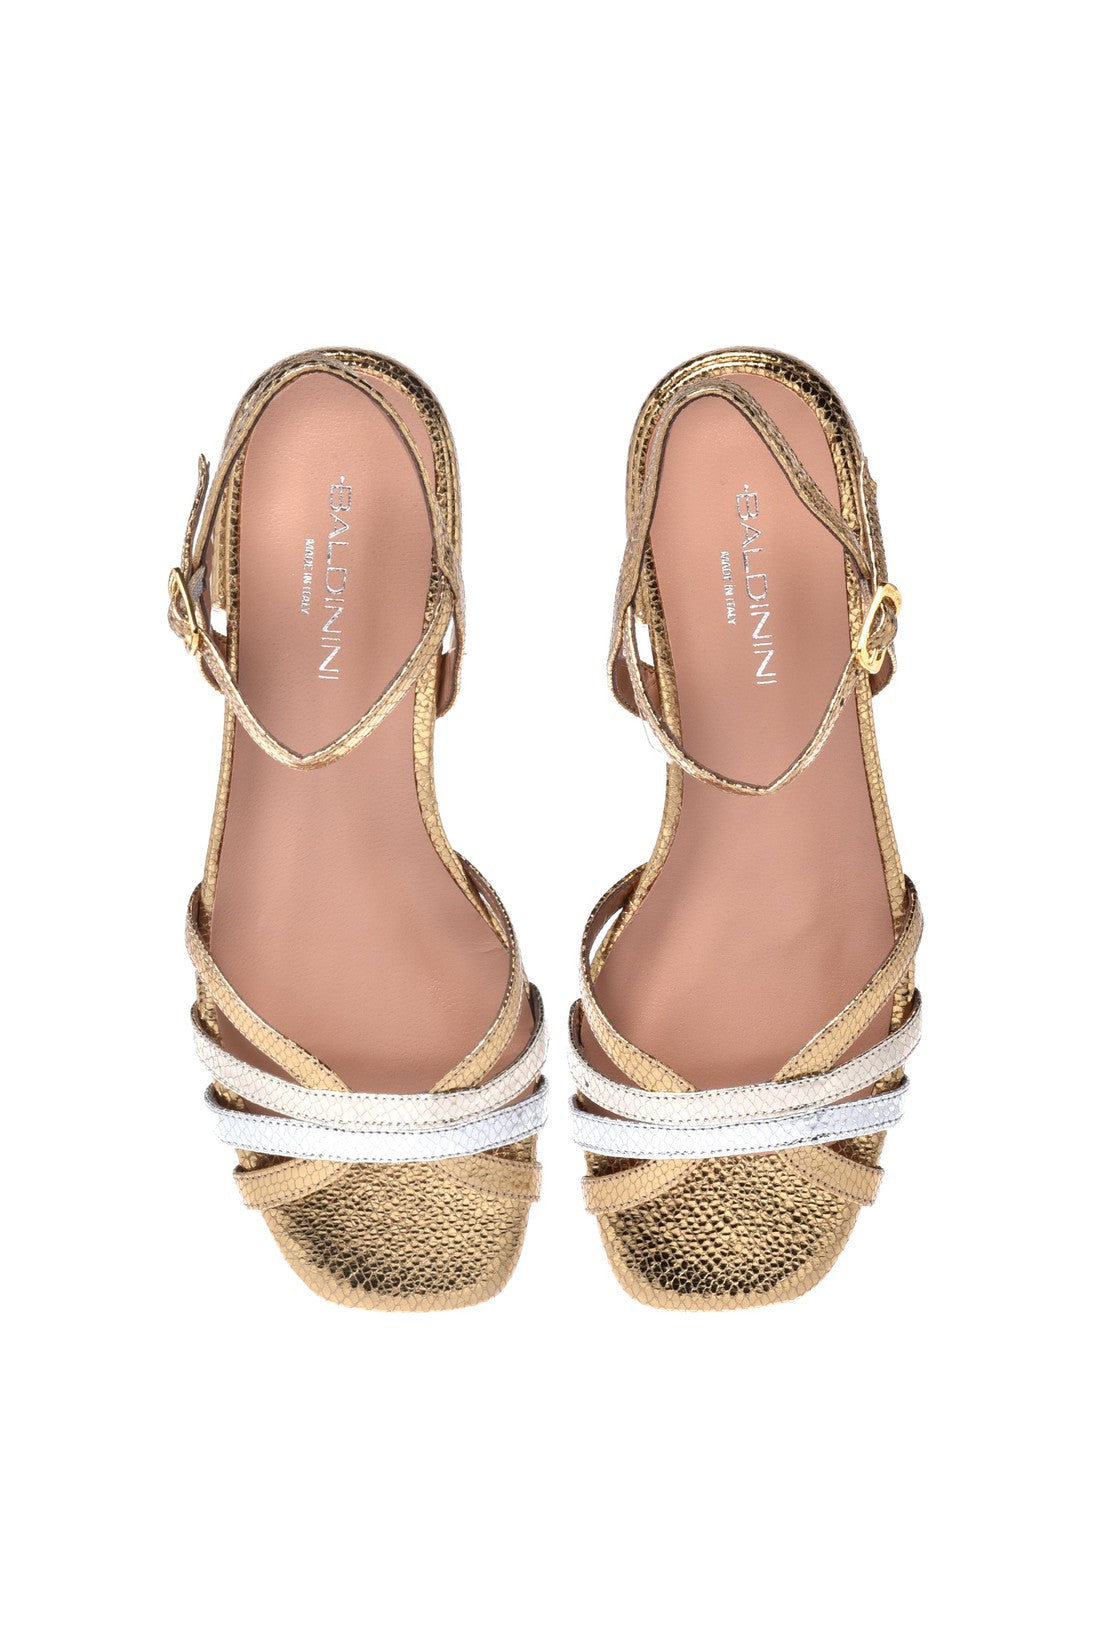 Sandal in silver and gold laminated nappa leather